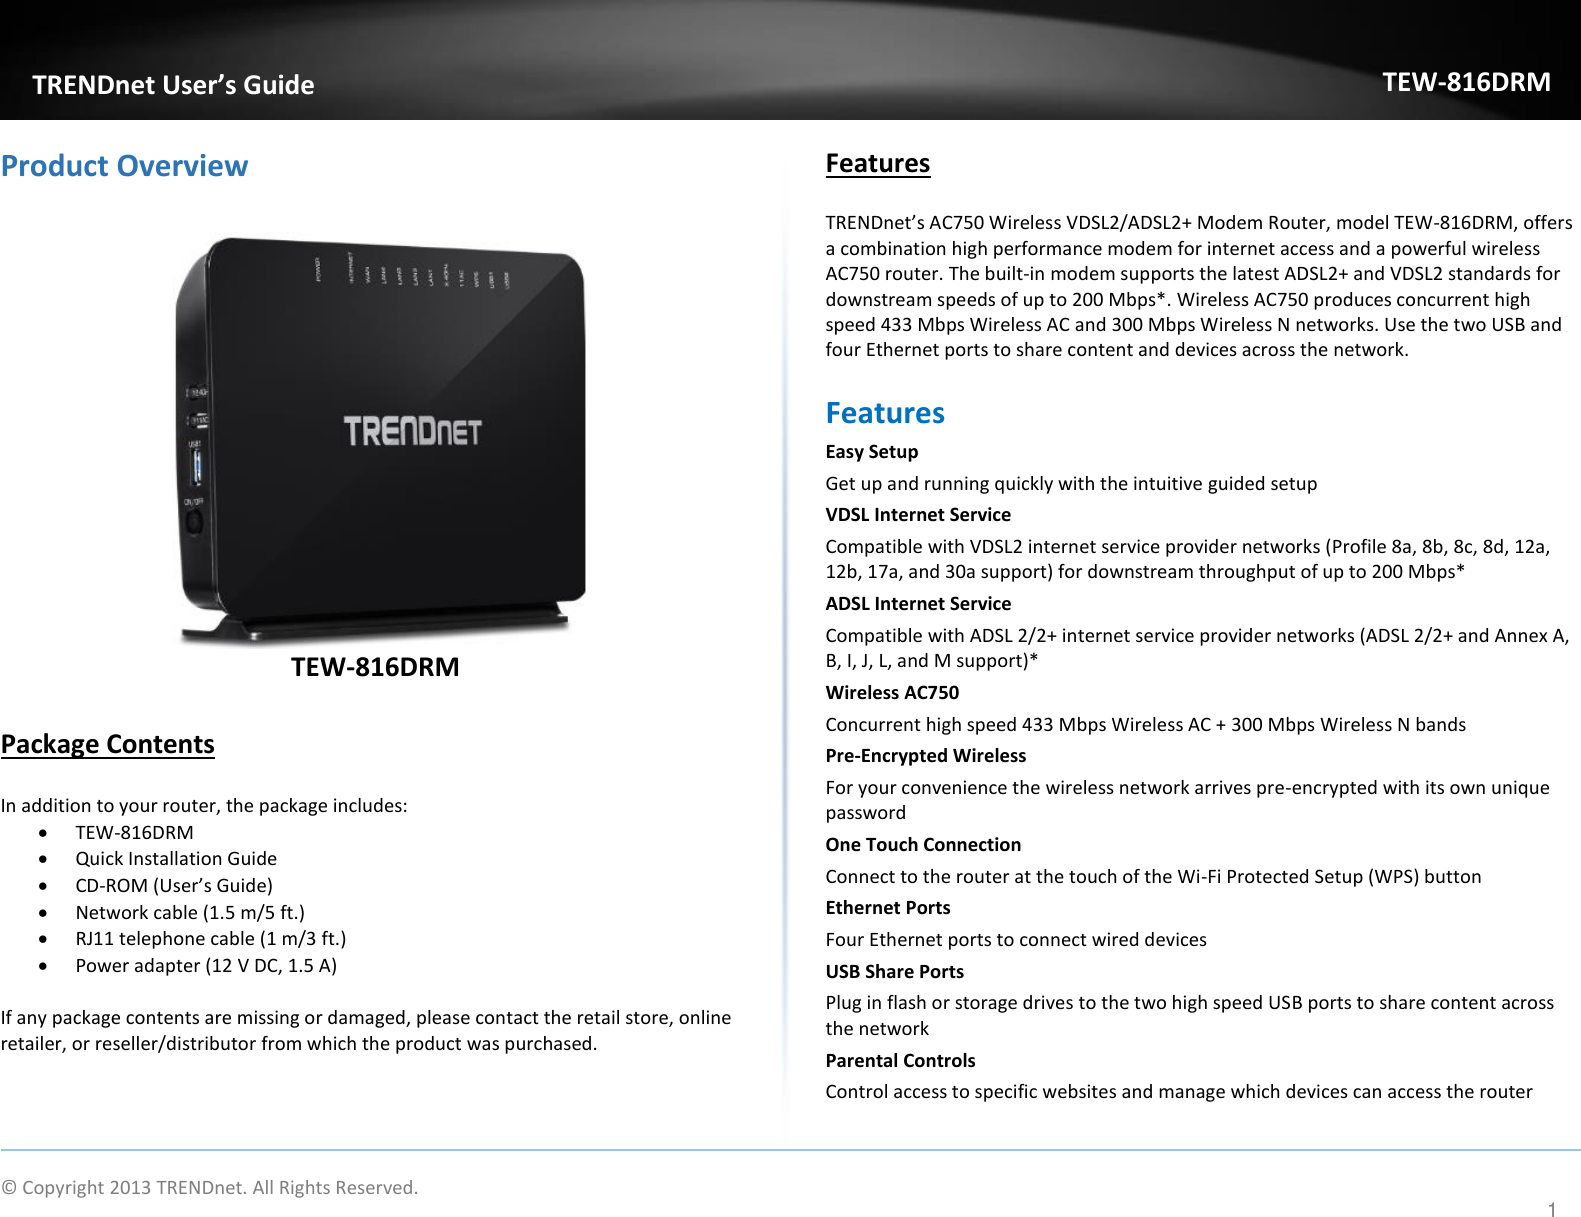             © Copyright 2013 TRENDnet. All Rights Reserved.       TRENDnet User’s Guide TEW-816DRM 1 Product Overview   TEW-816DRM  Package Contents  In addition to your router, the package includes:  TEW-816DRM  Quick Installation Guide  CD-ROM (User’s Guide)  Network cable (1.5 m/5 ft.)  RJ11 telephone cable (1 m/3 ft.)  Power adapter (12 V DC, 1.5 A)   If any package contents are missing or damaged, please contact the retail store, online retailer, or reseller/distributor from which the product was purchased. Features TRENDnet’s AC750 Wireless VDSL2/ADSL2+ Modem Router, model TEW-816DRM, offers a combination high performance modem for internet access and a powerful wireless AC750 router. The built-in modem supports the latest ADSL2+ and VDSL2 standards for downstream speeds of up to 200 Mbps*. Wireless AC750 produces concurrent high speed 433 Mbps Wireless AC and 300 Mbps Wireless N networks. Use the two USB and four Ethernet ports to share content and devices across the network. Features Easy Setup Get up and running quickly with the intuitive guided setup VDSL Internet Service  Compatible with VDSL2 internet service provider networks (Profile 8a, 8b, 8c, 8d, 12a, 12b, 17a, and 30a support) for downstream throughput of up to 200 Mbps* ADSL Internet Service  Compatible with ADSL 2/2+ internet service provider networks (ADSL 2/2+ and Annex A, B, I, J, L, and M support)* Wireless AC750 Concurrent high speed 433 Mbps Wireless AC + 300 Mbps Wireless N bands Pre-Encrypted Wireless  For your convenience the wireless network arrives pre-encrypted with its own unique password One Touch Connection Connect to the router at the touch of the Wi-Fi Protected Setup (WPS) button Ethernet Ports  Four Ethernet ports to connect wired devices  USB Share Ports  Plug in flash or storage drives to the two high speed USB ports to share content across the network Parental Controls Control access to specific websites and manage which devices can access the router  